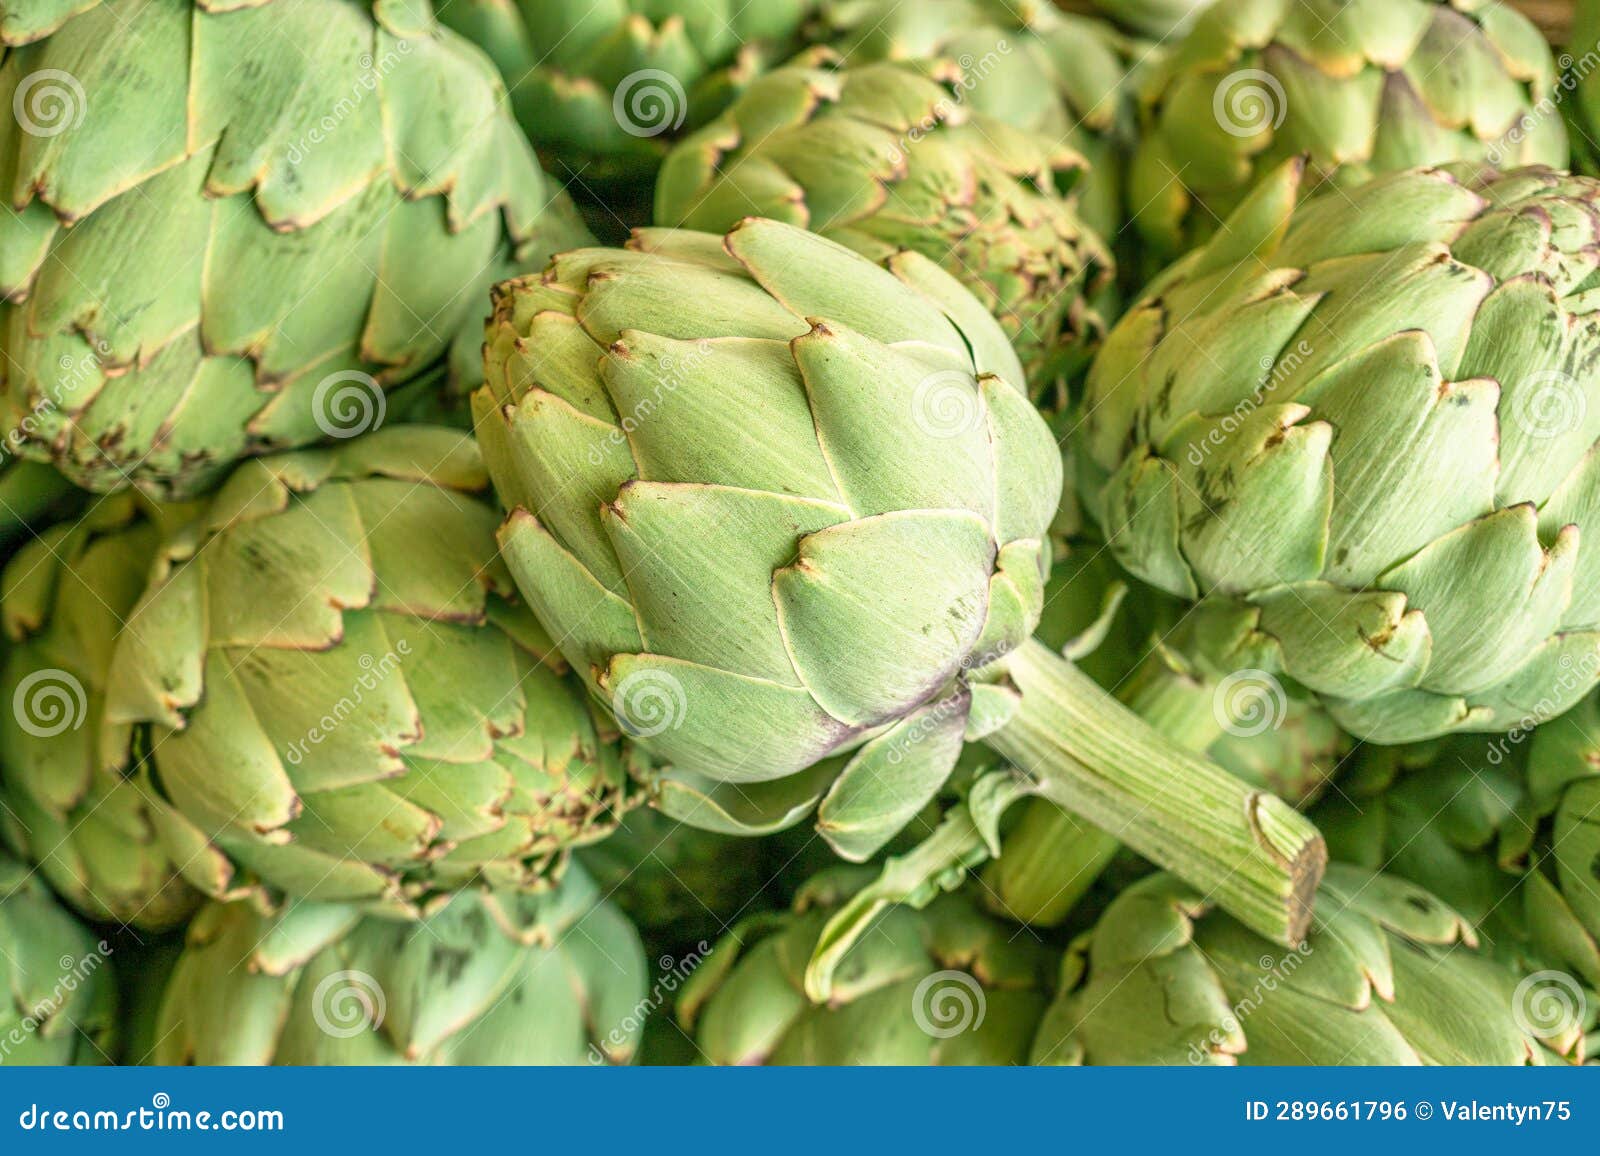 green french artichoke flowers buds on the farm market stall